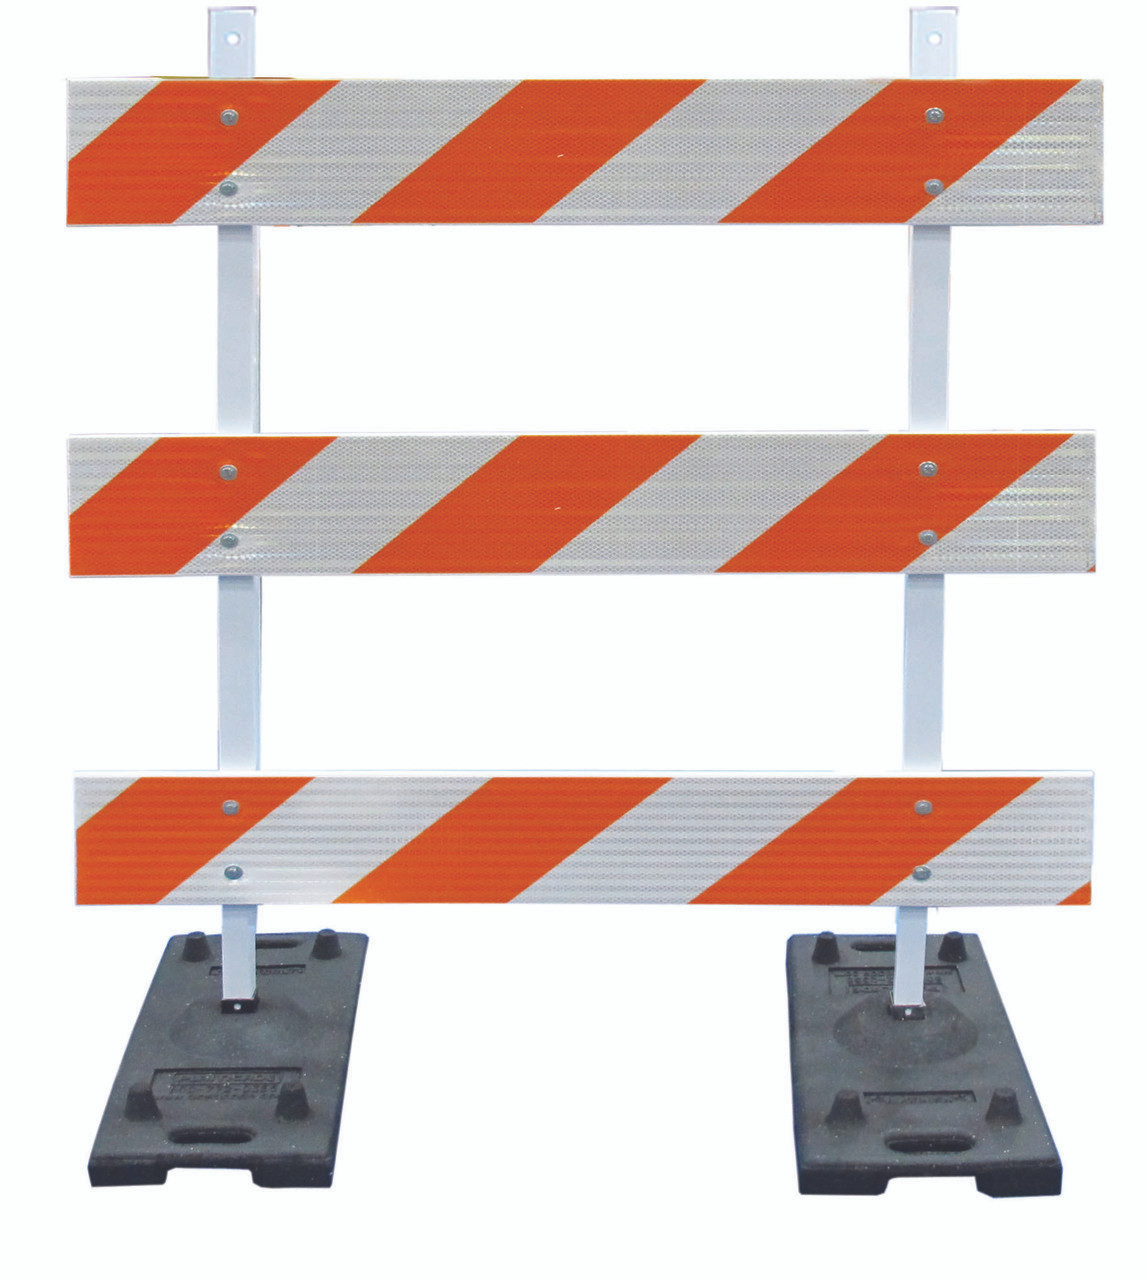 POWER POST&trade; TYPE III BARRICADE KITS - 4' Boards with EG Sheeting BOTH SIDES OF BOARDS